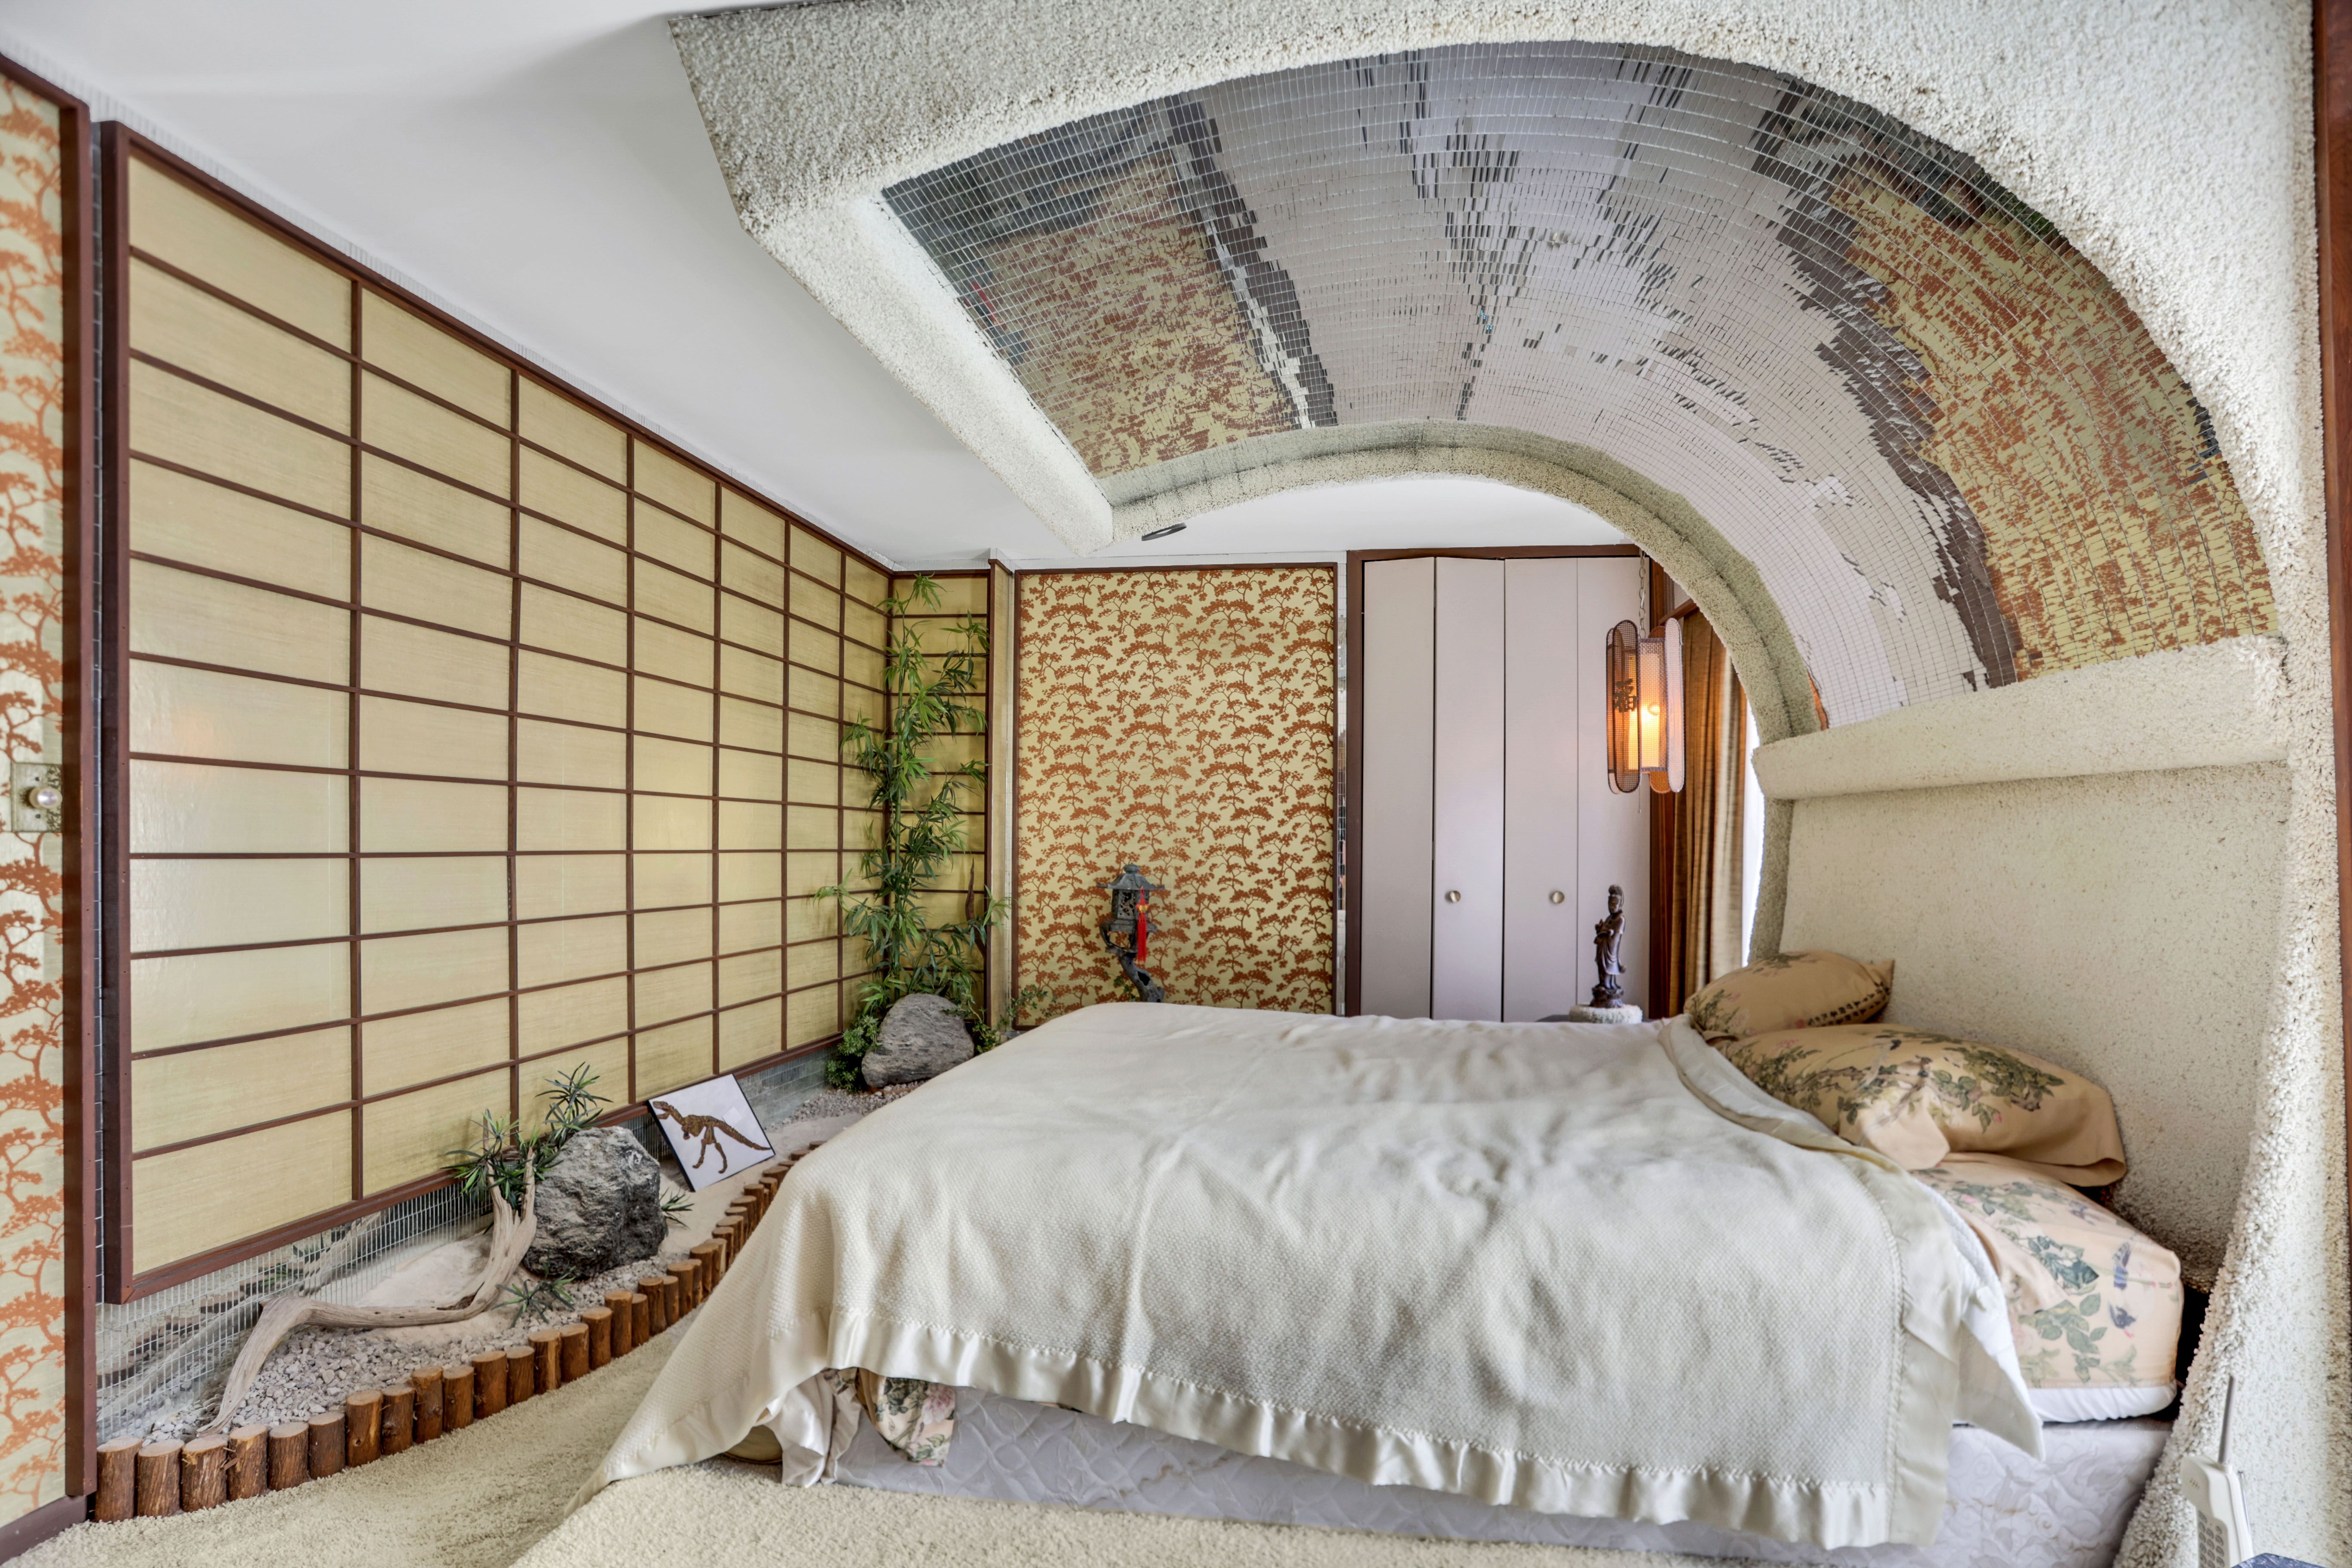 A bed with a wave-like headboard covered in mirrored tiles that stretches to the ceiling, facing an interior rock garden and Japanese walls